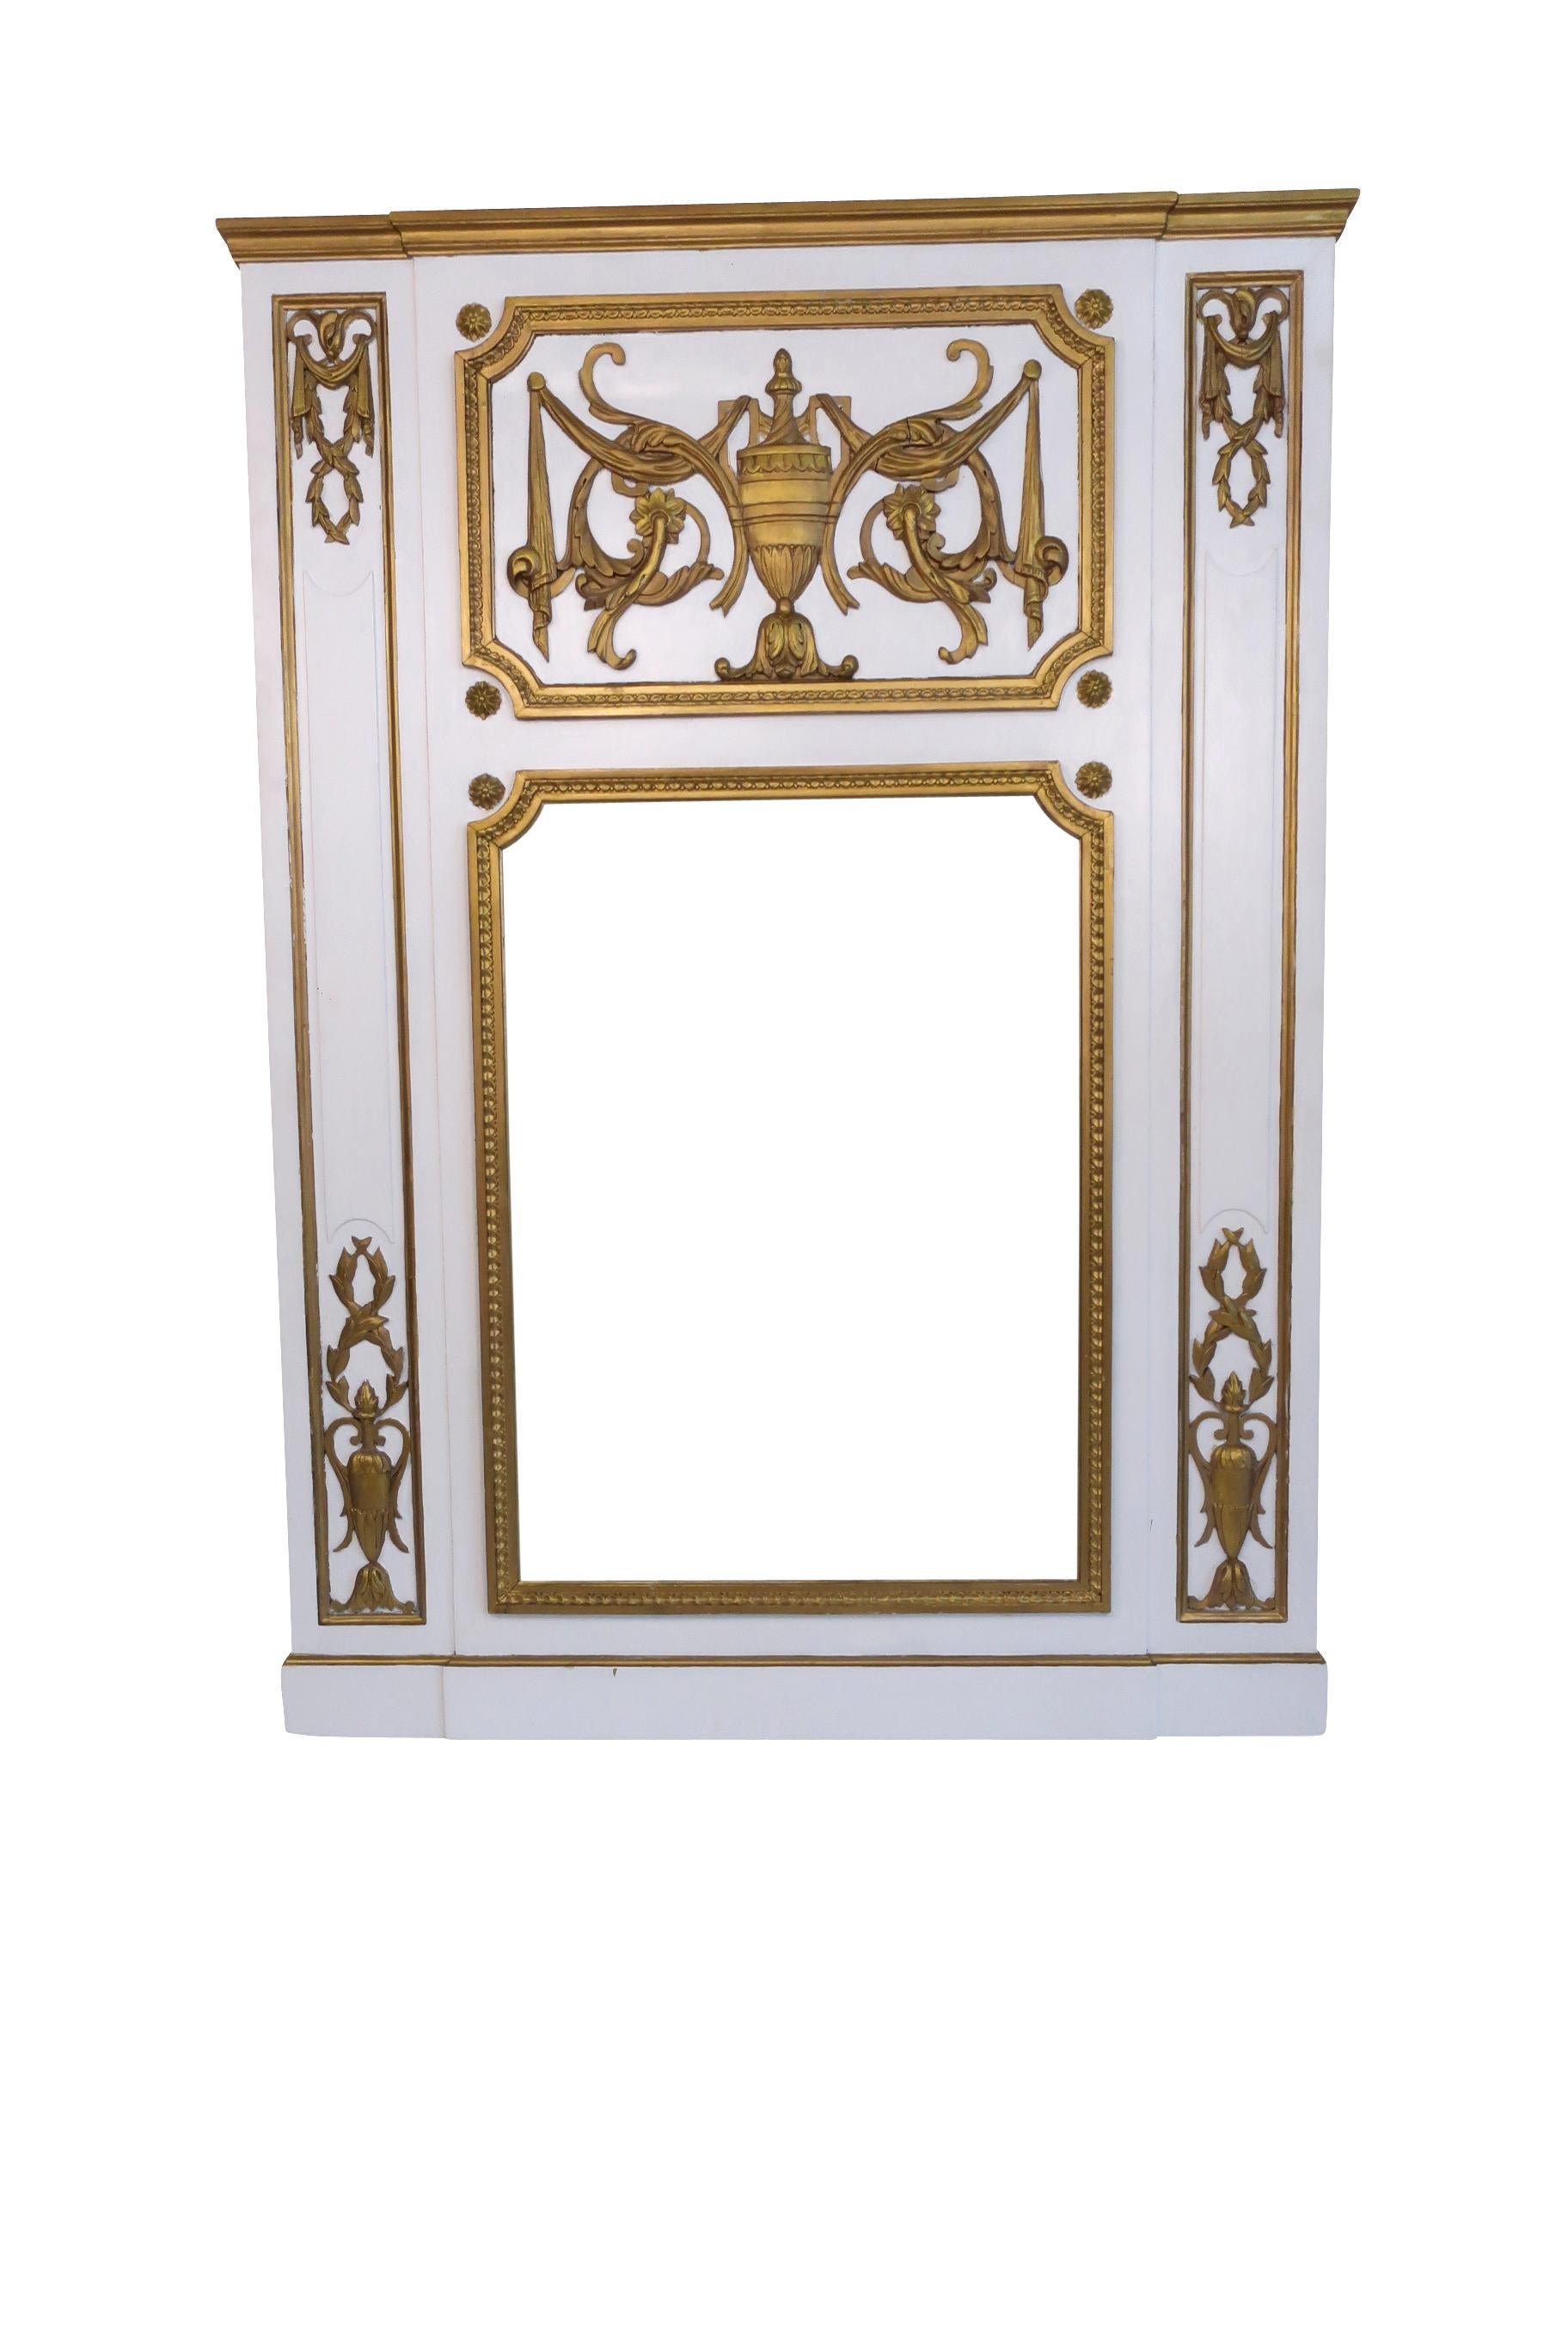 Lovely white and gold painted overmantel mirror with a central stylized urn decoration with garlands and swags draped off the central urn. The top side panels are adorned with stylized swags and laurel wreaths on both corners in true neoclassical